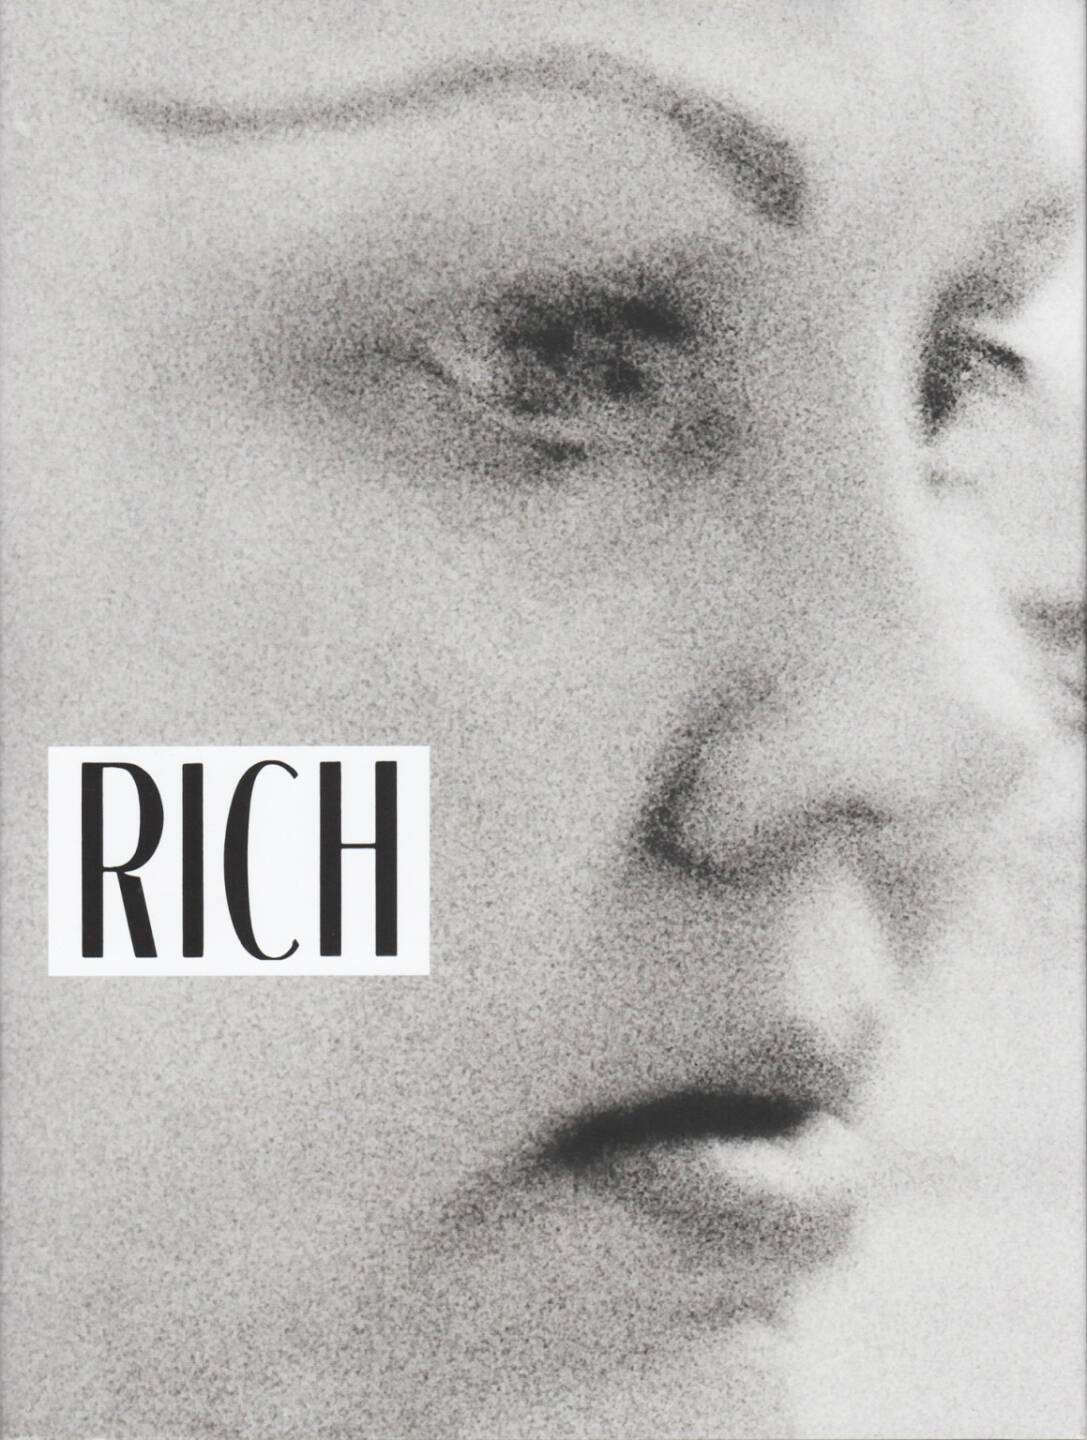 Jim Goldberg - Rich and Poor, Steidl 2014, Cover, http://josefchladek.com/book/jim_goldberg_-_rich_and_poor